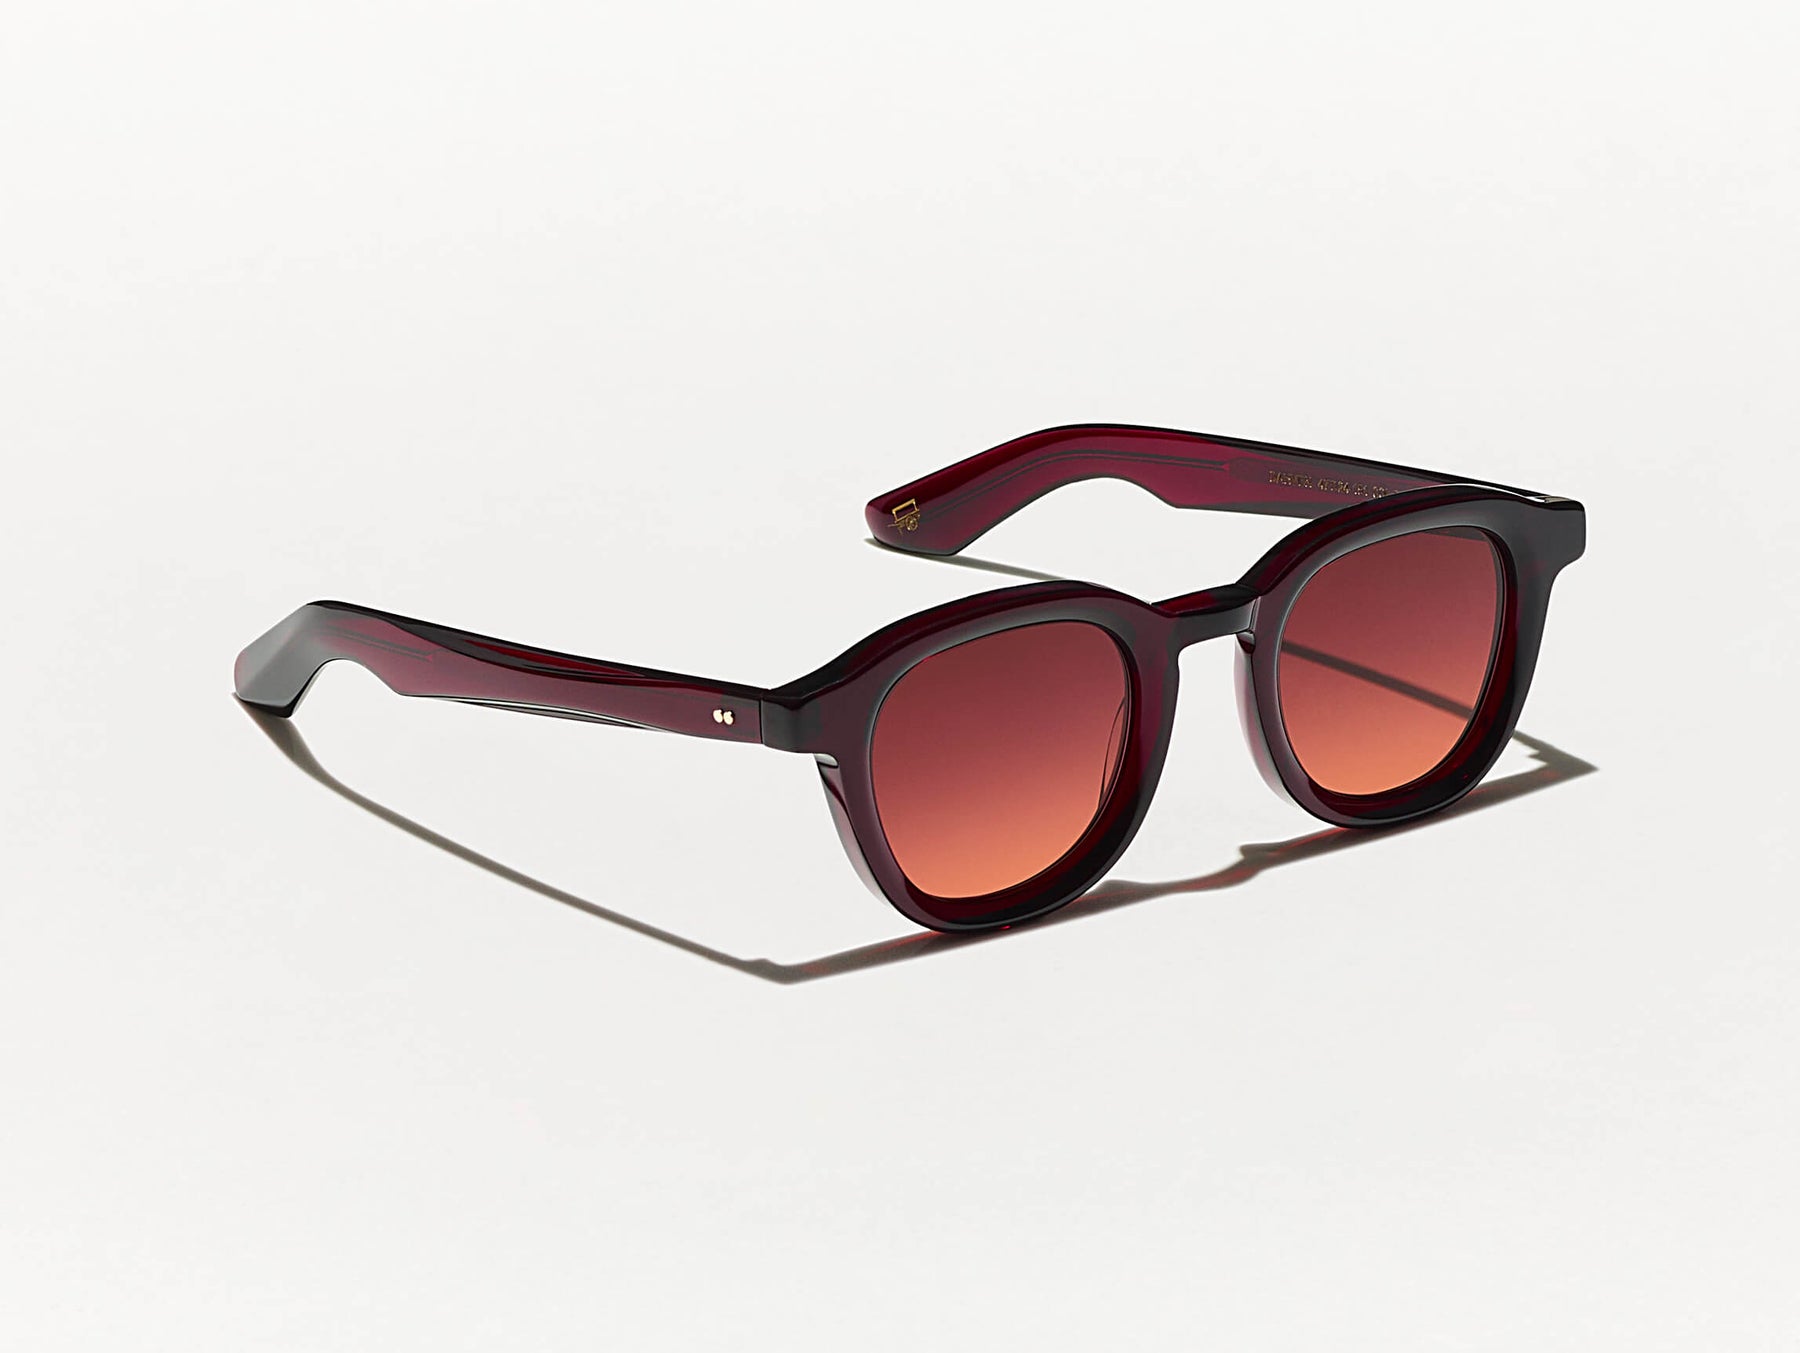 The DAHVEN SUN in Burgundy with Cabernet Tinted Lenses